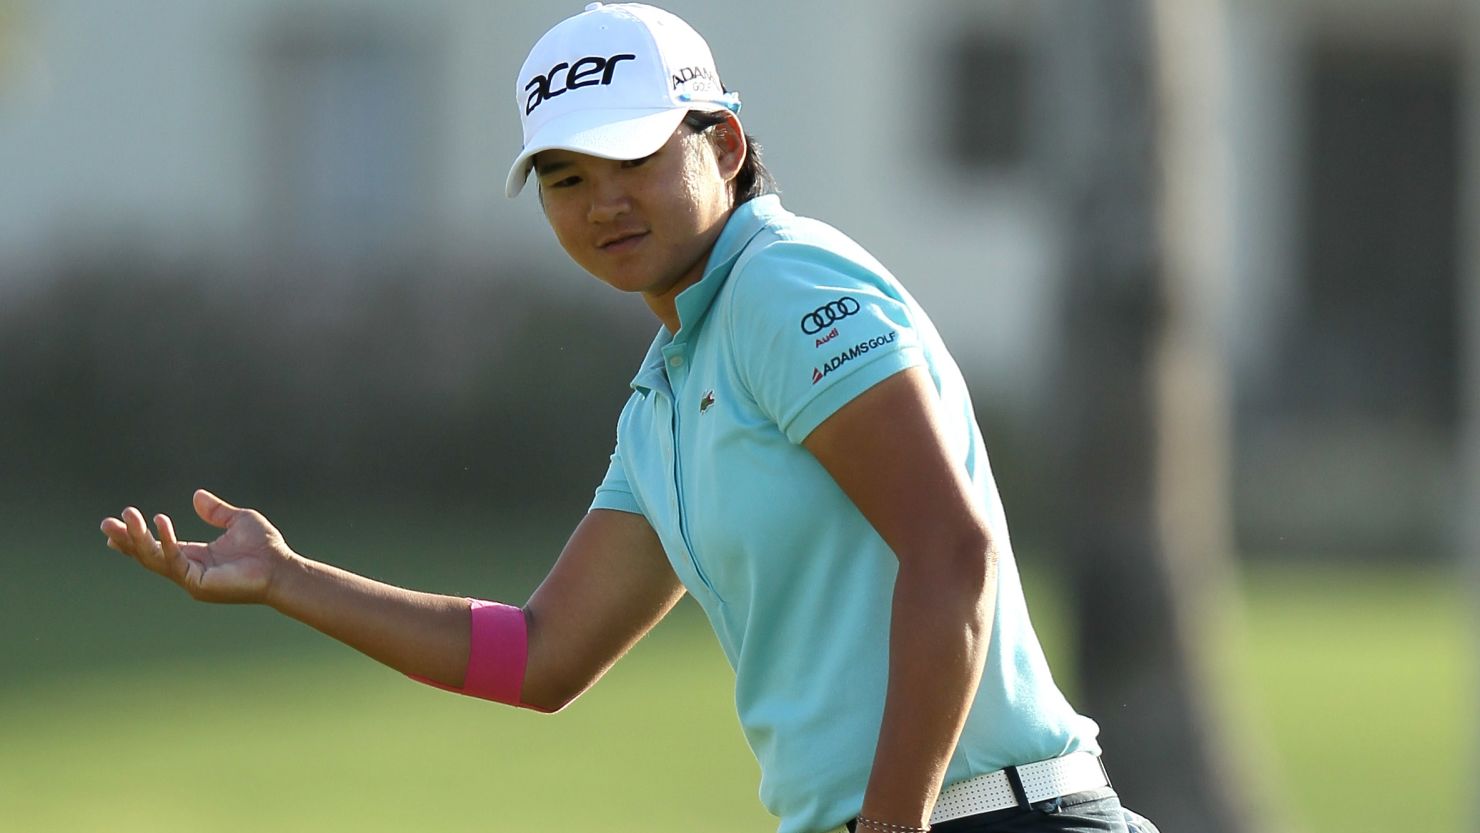 Yani Tseng shows her frustration after a putt fails to drop during her third round 71 at Mission Hills.